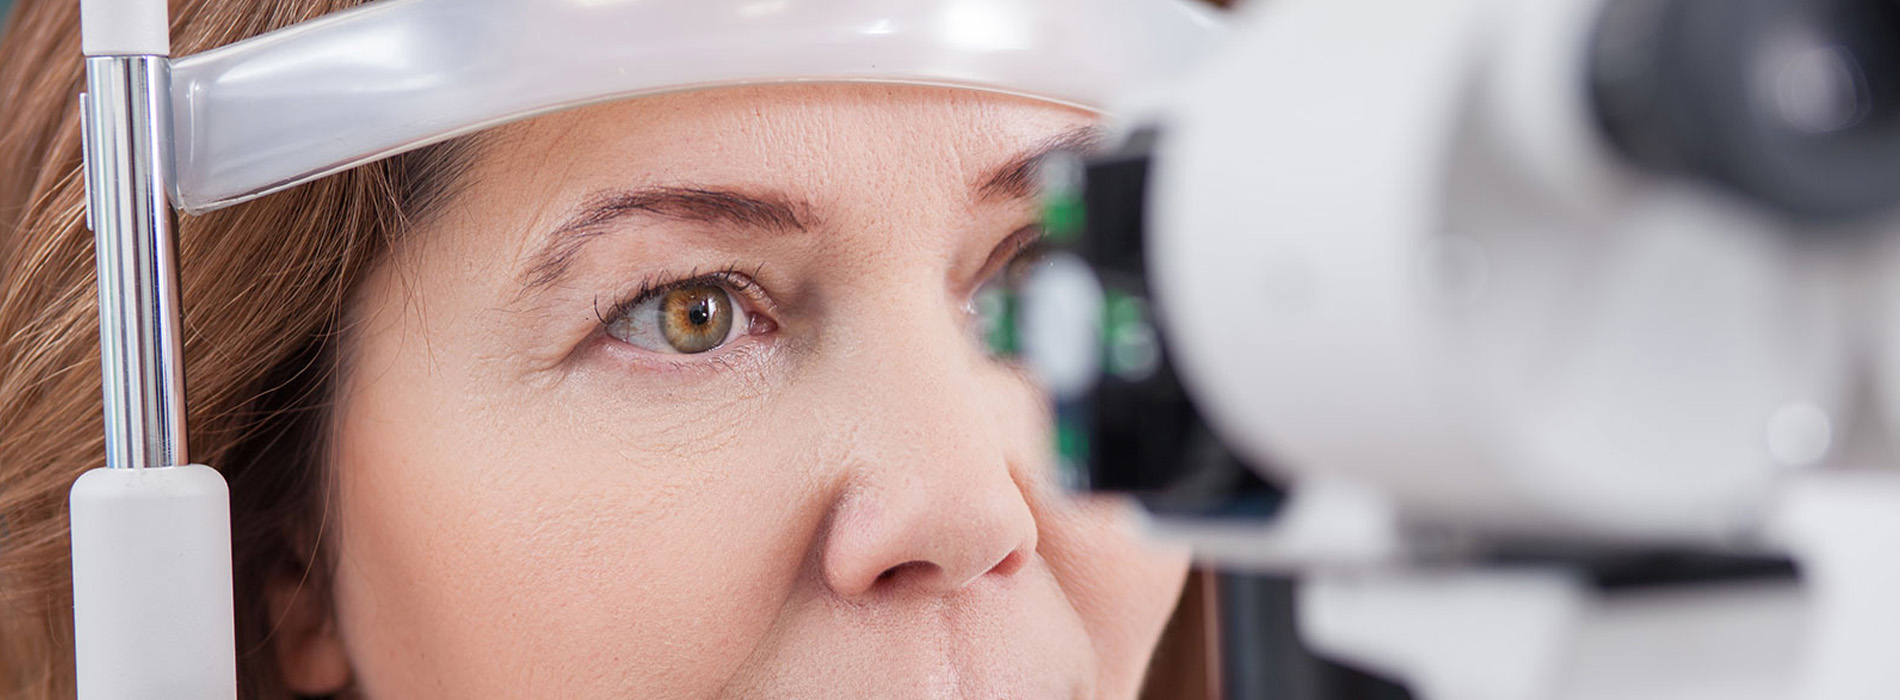 Diabetic Eye Care Services in Texas A M